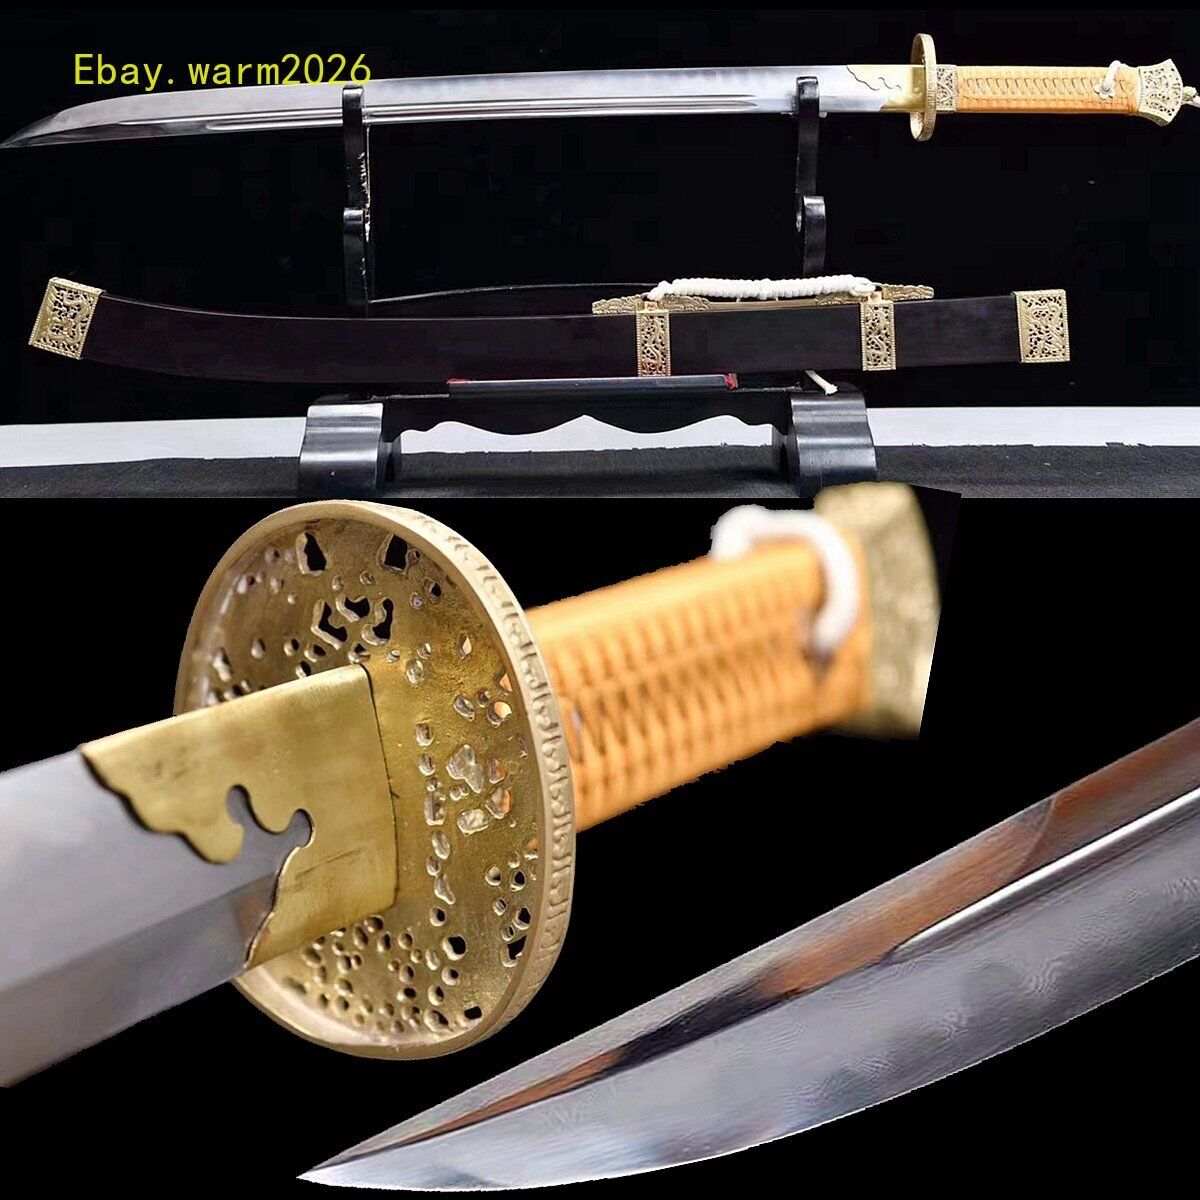 Chinese Qing Dao Sword Yanling Broadsword Folded W/ Clay Tempered Blade 方鞘雁翎刀